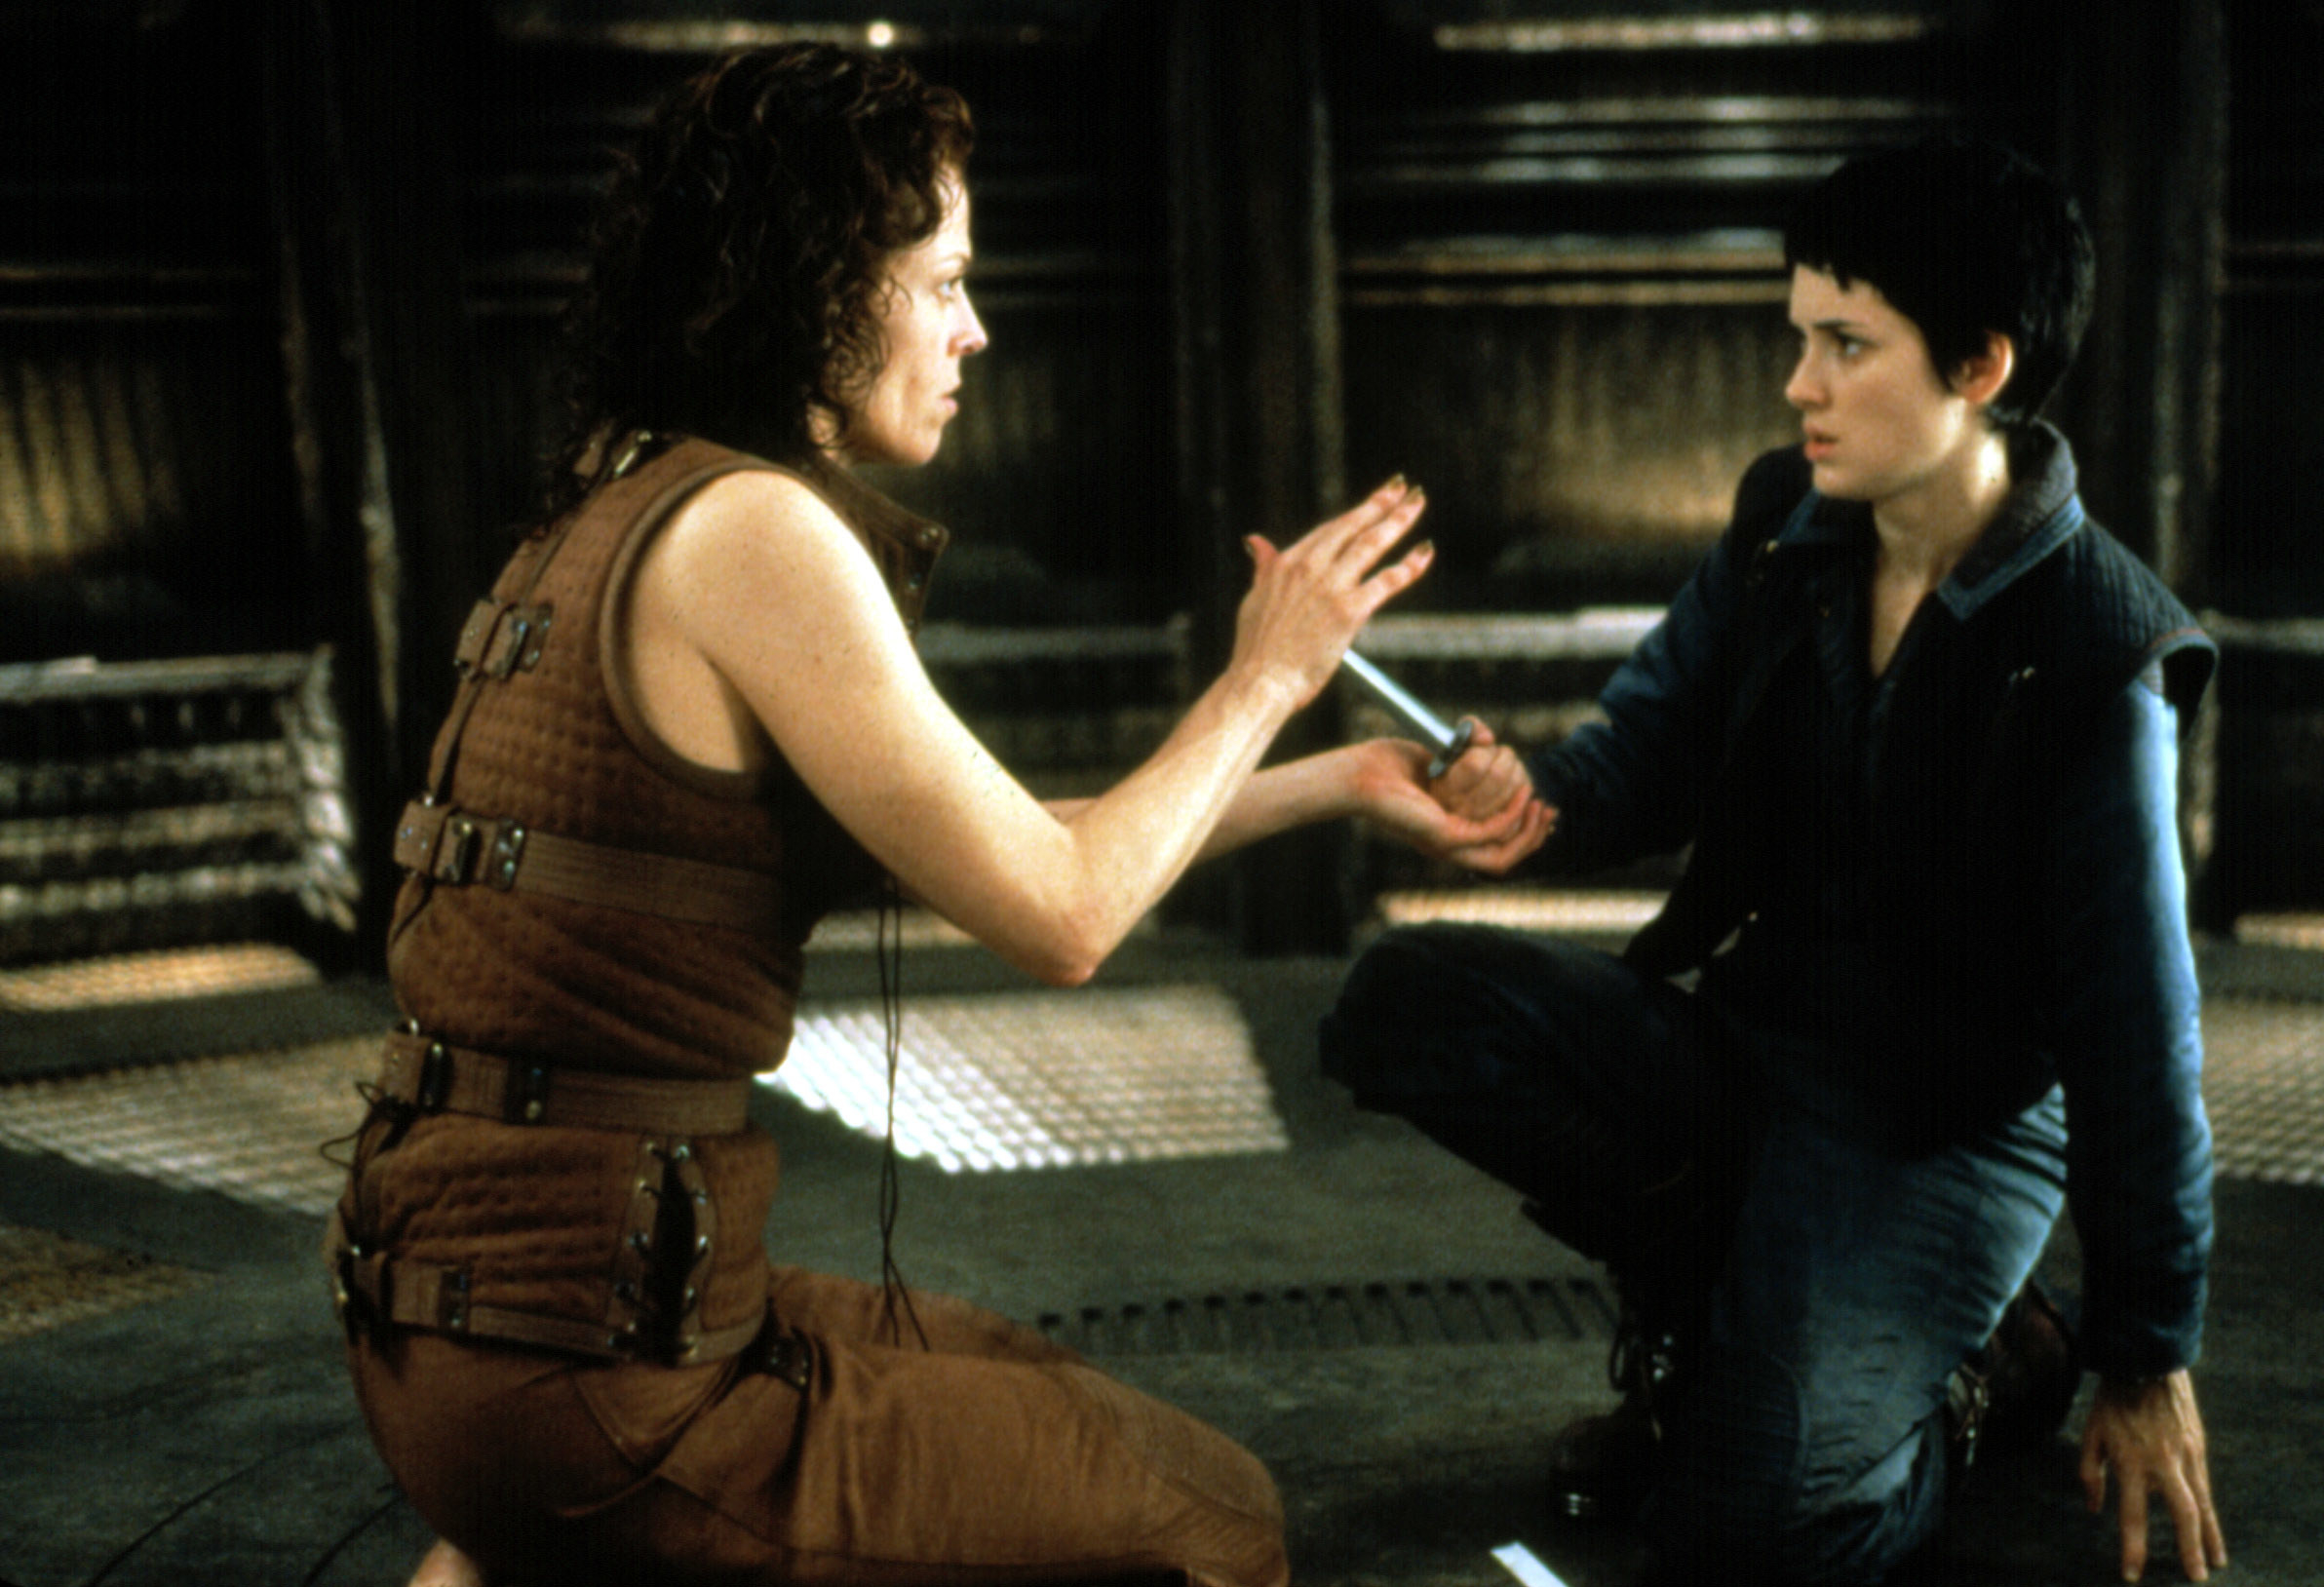 Winona Ryder pointing a weapon at Sigourney Weaver, who holds her hand up to diffuse the situation